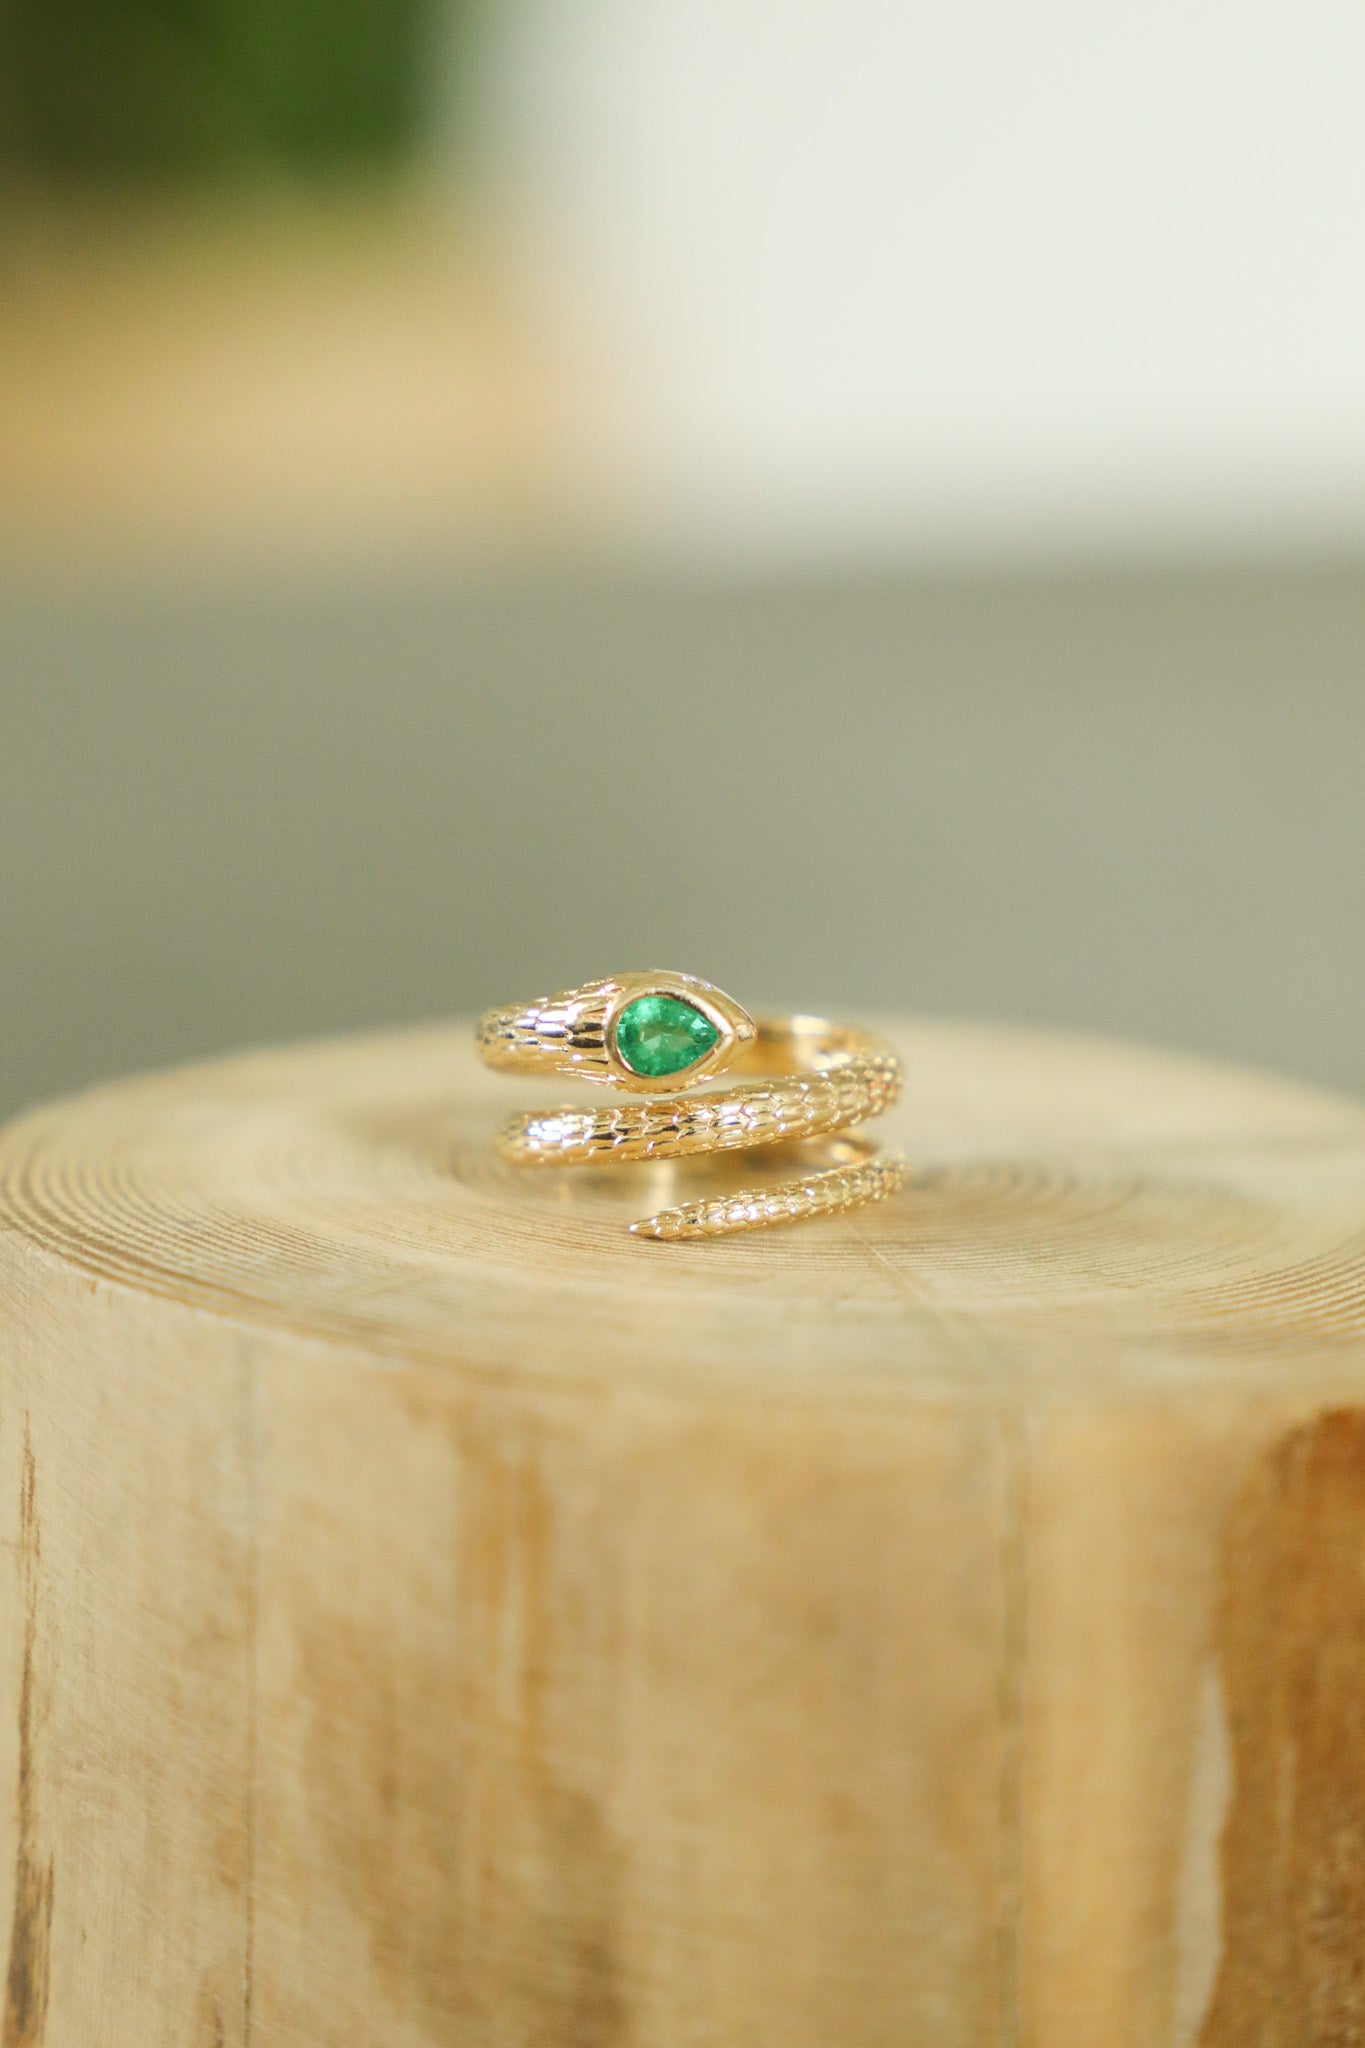 R007 - 14k YG Size 7 Snake Coil Band Ring w/1 Pear Shaped Emerald (0.28cts) & 2 Diamonds (0.03cts)